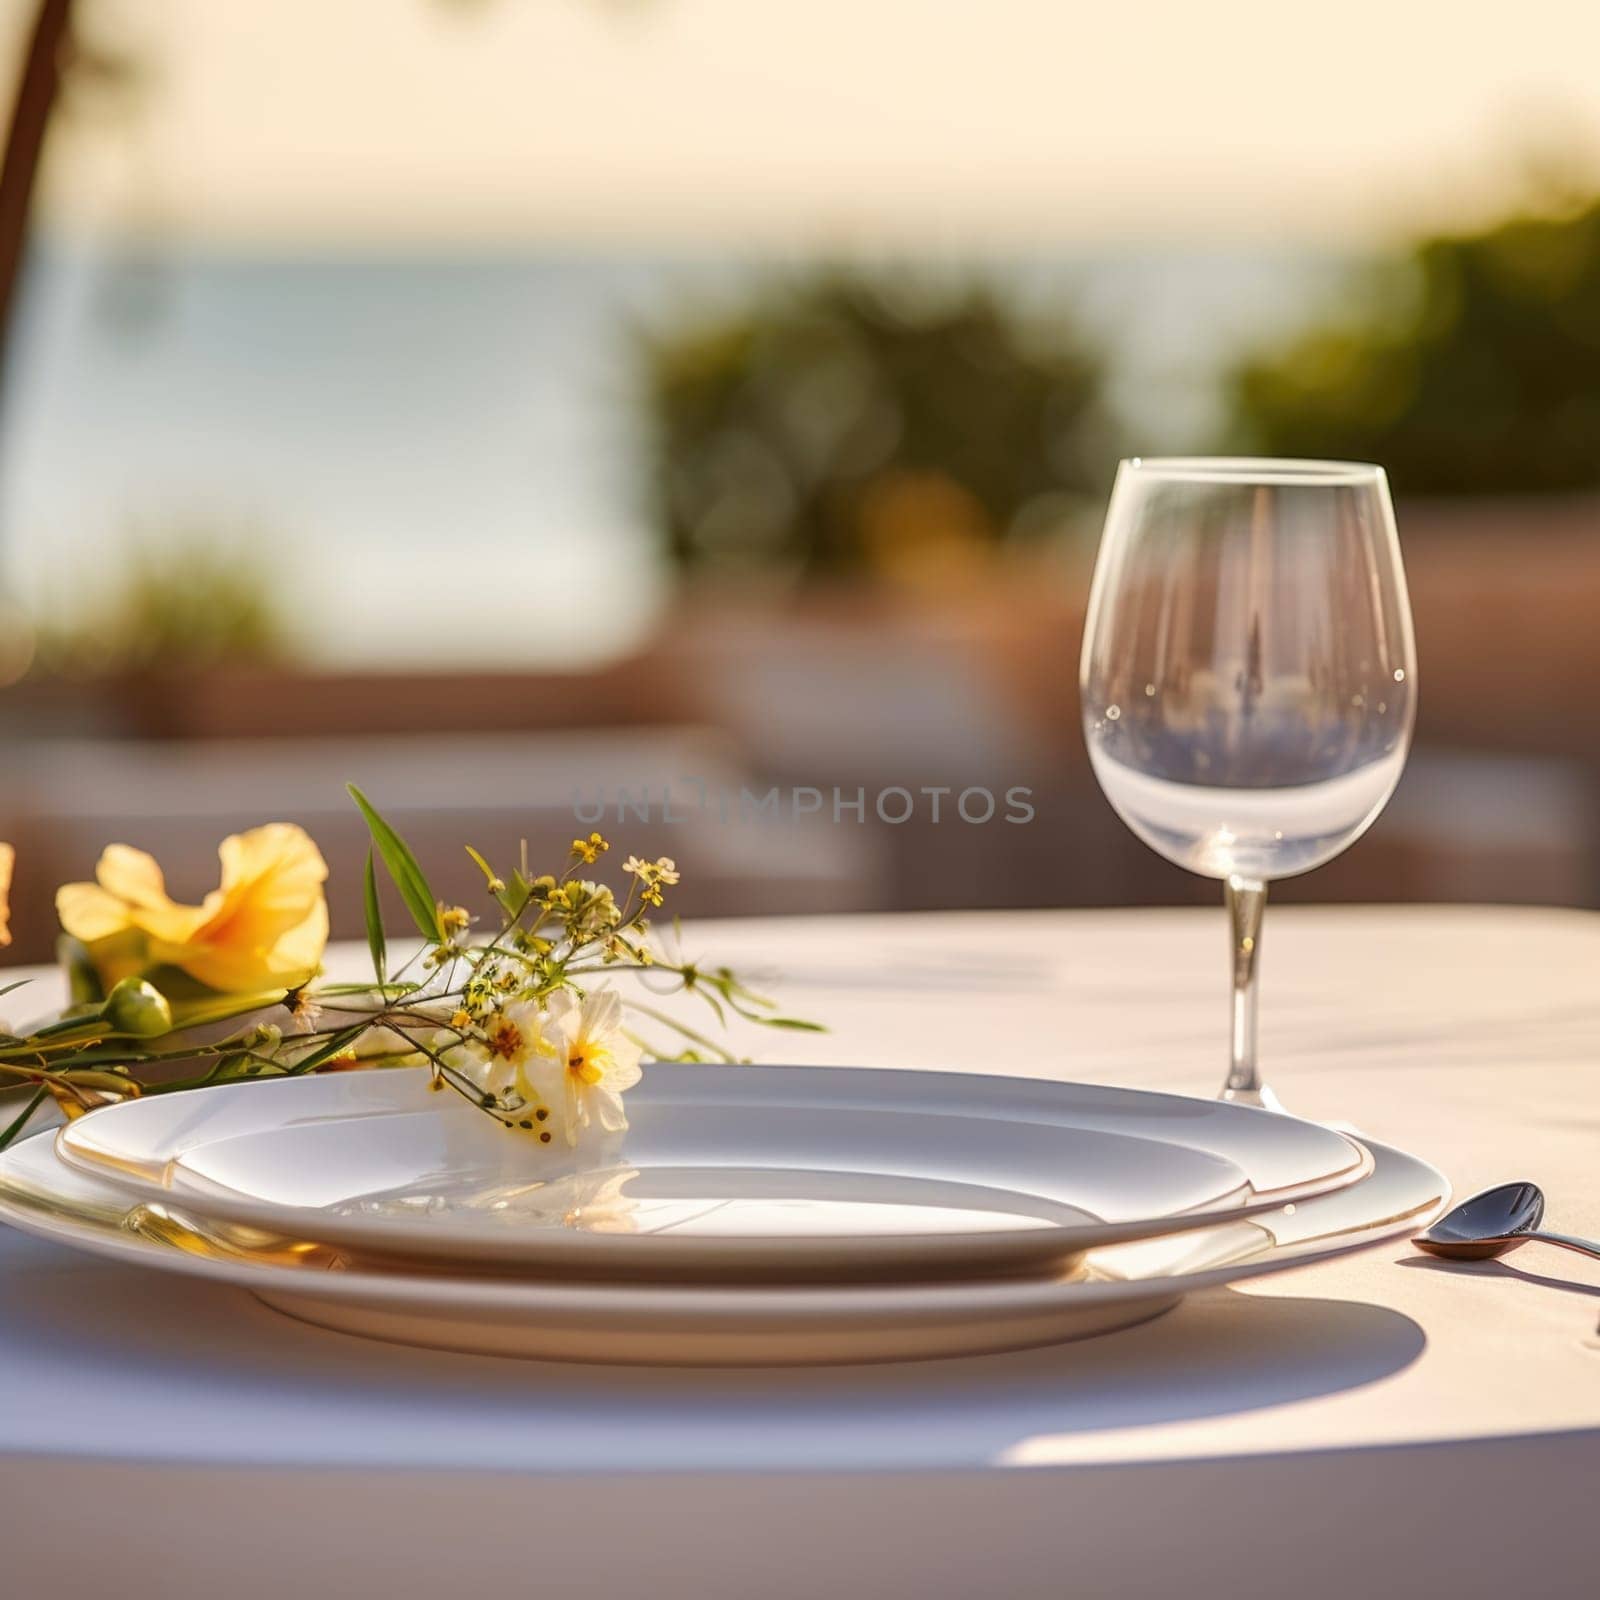 A white plate with flowers and a glass of wine on a table